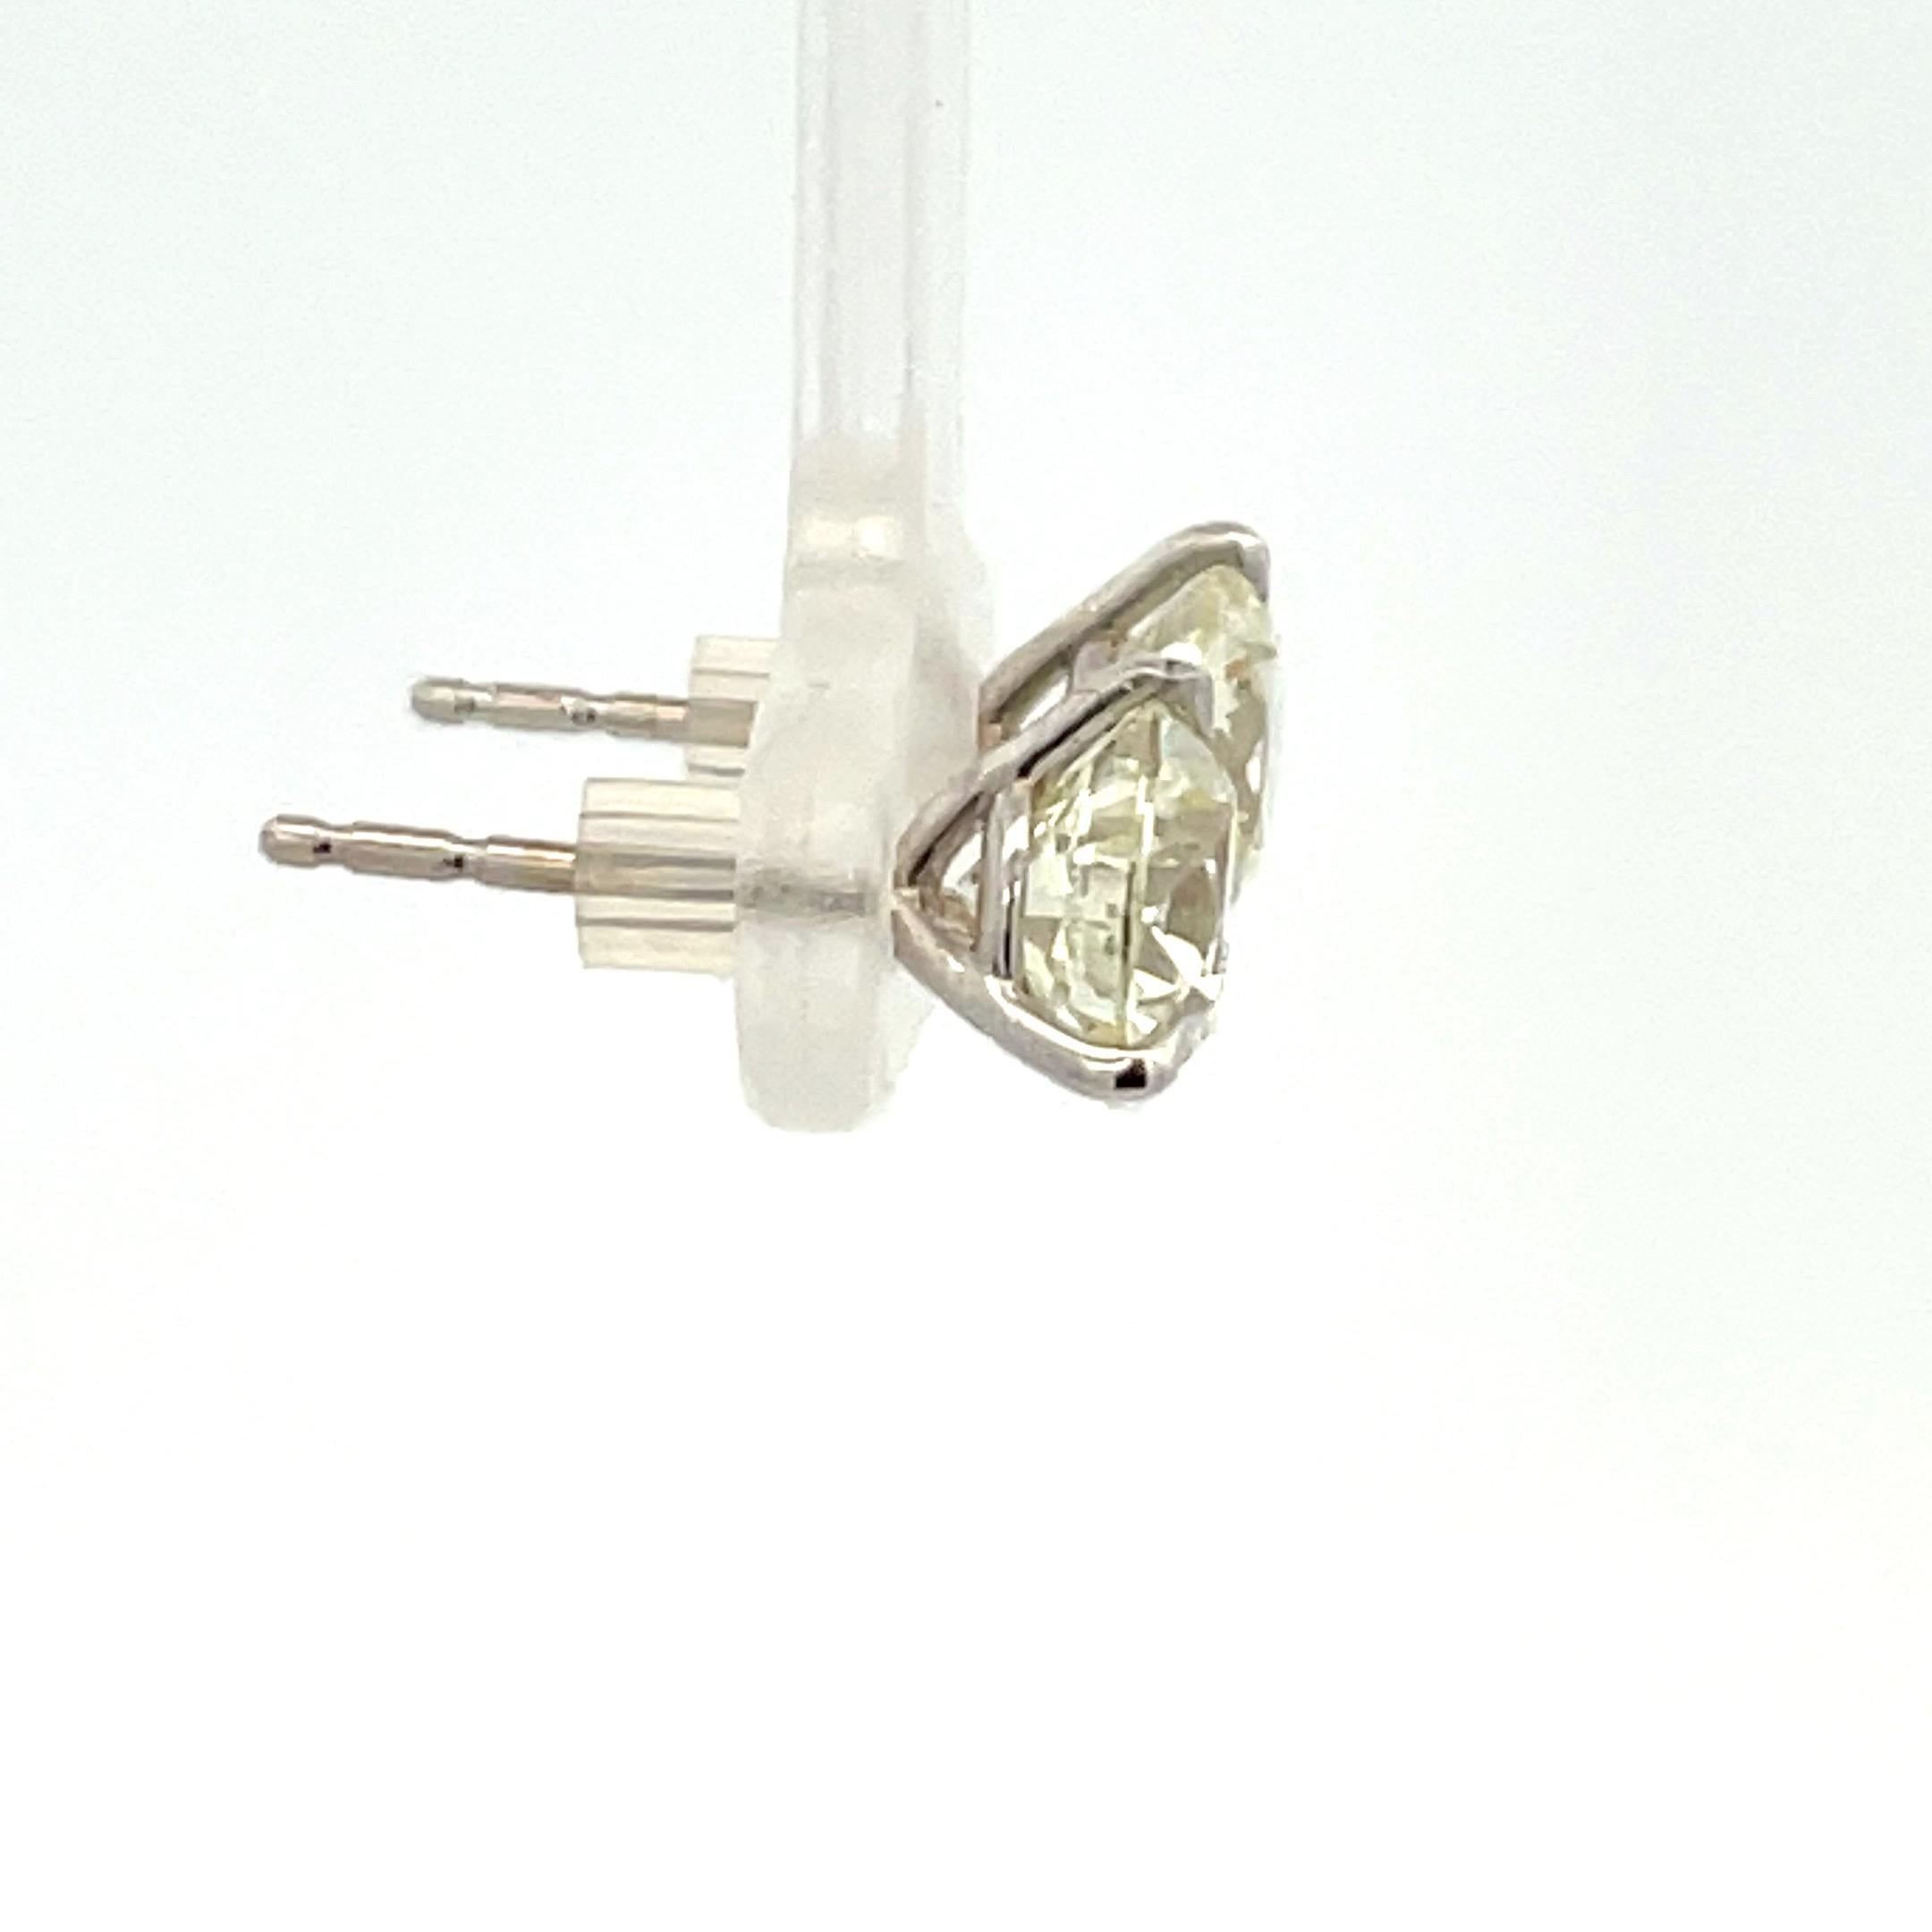 Diamond stud earrings weighing 3.20 Carats in a 3 prong Champagne setting, 18 Karat White Gold.
Color K-L
Clarity SI1-2

Comments: FULL of Life, Eye Clean, Does not look yellow - faces up better than K-L

Setting can be changed to a Basket, Martini